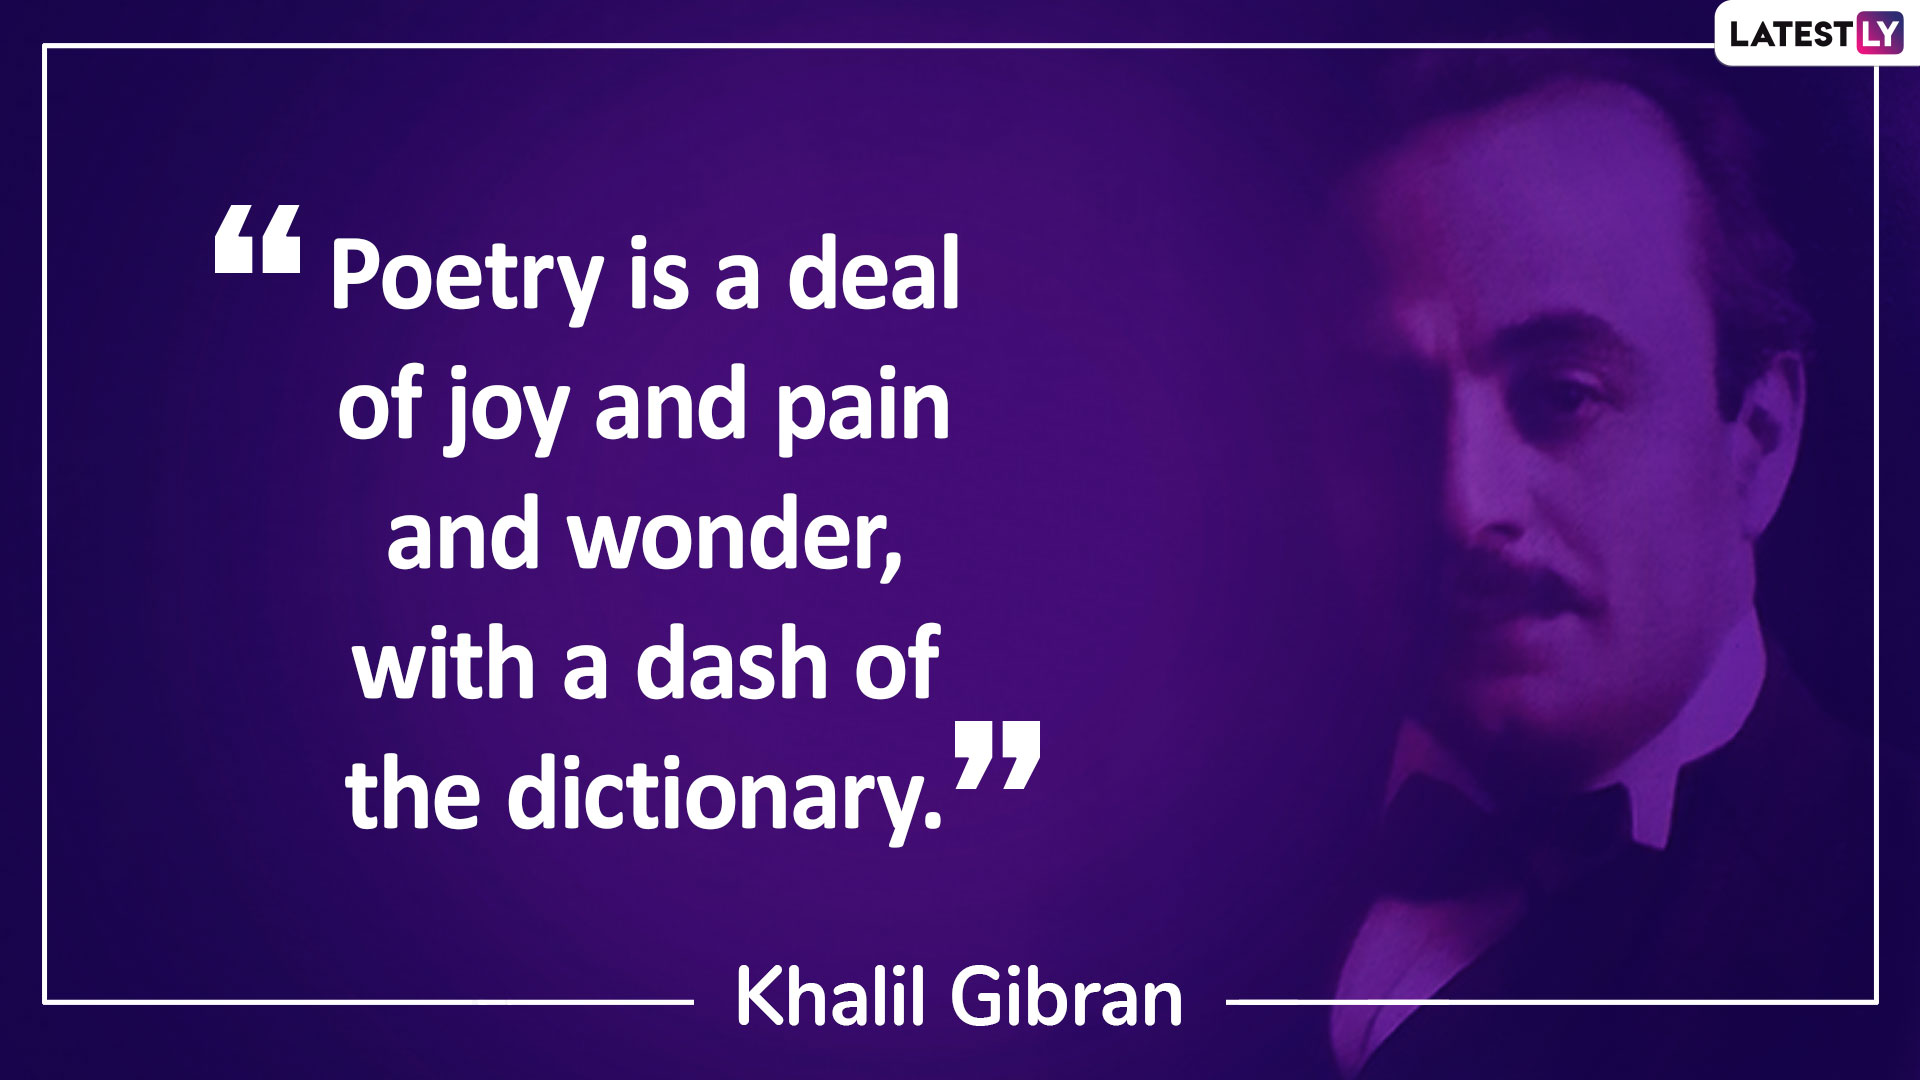 world-poetry-day-2020-quotes-and-lines-by-famous-poets-that-describe